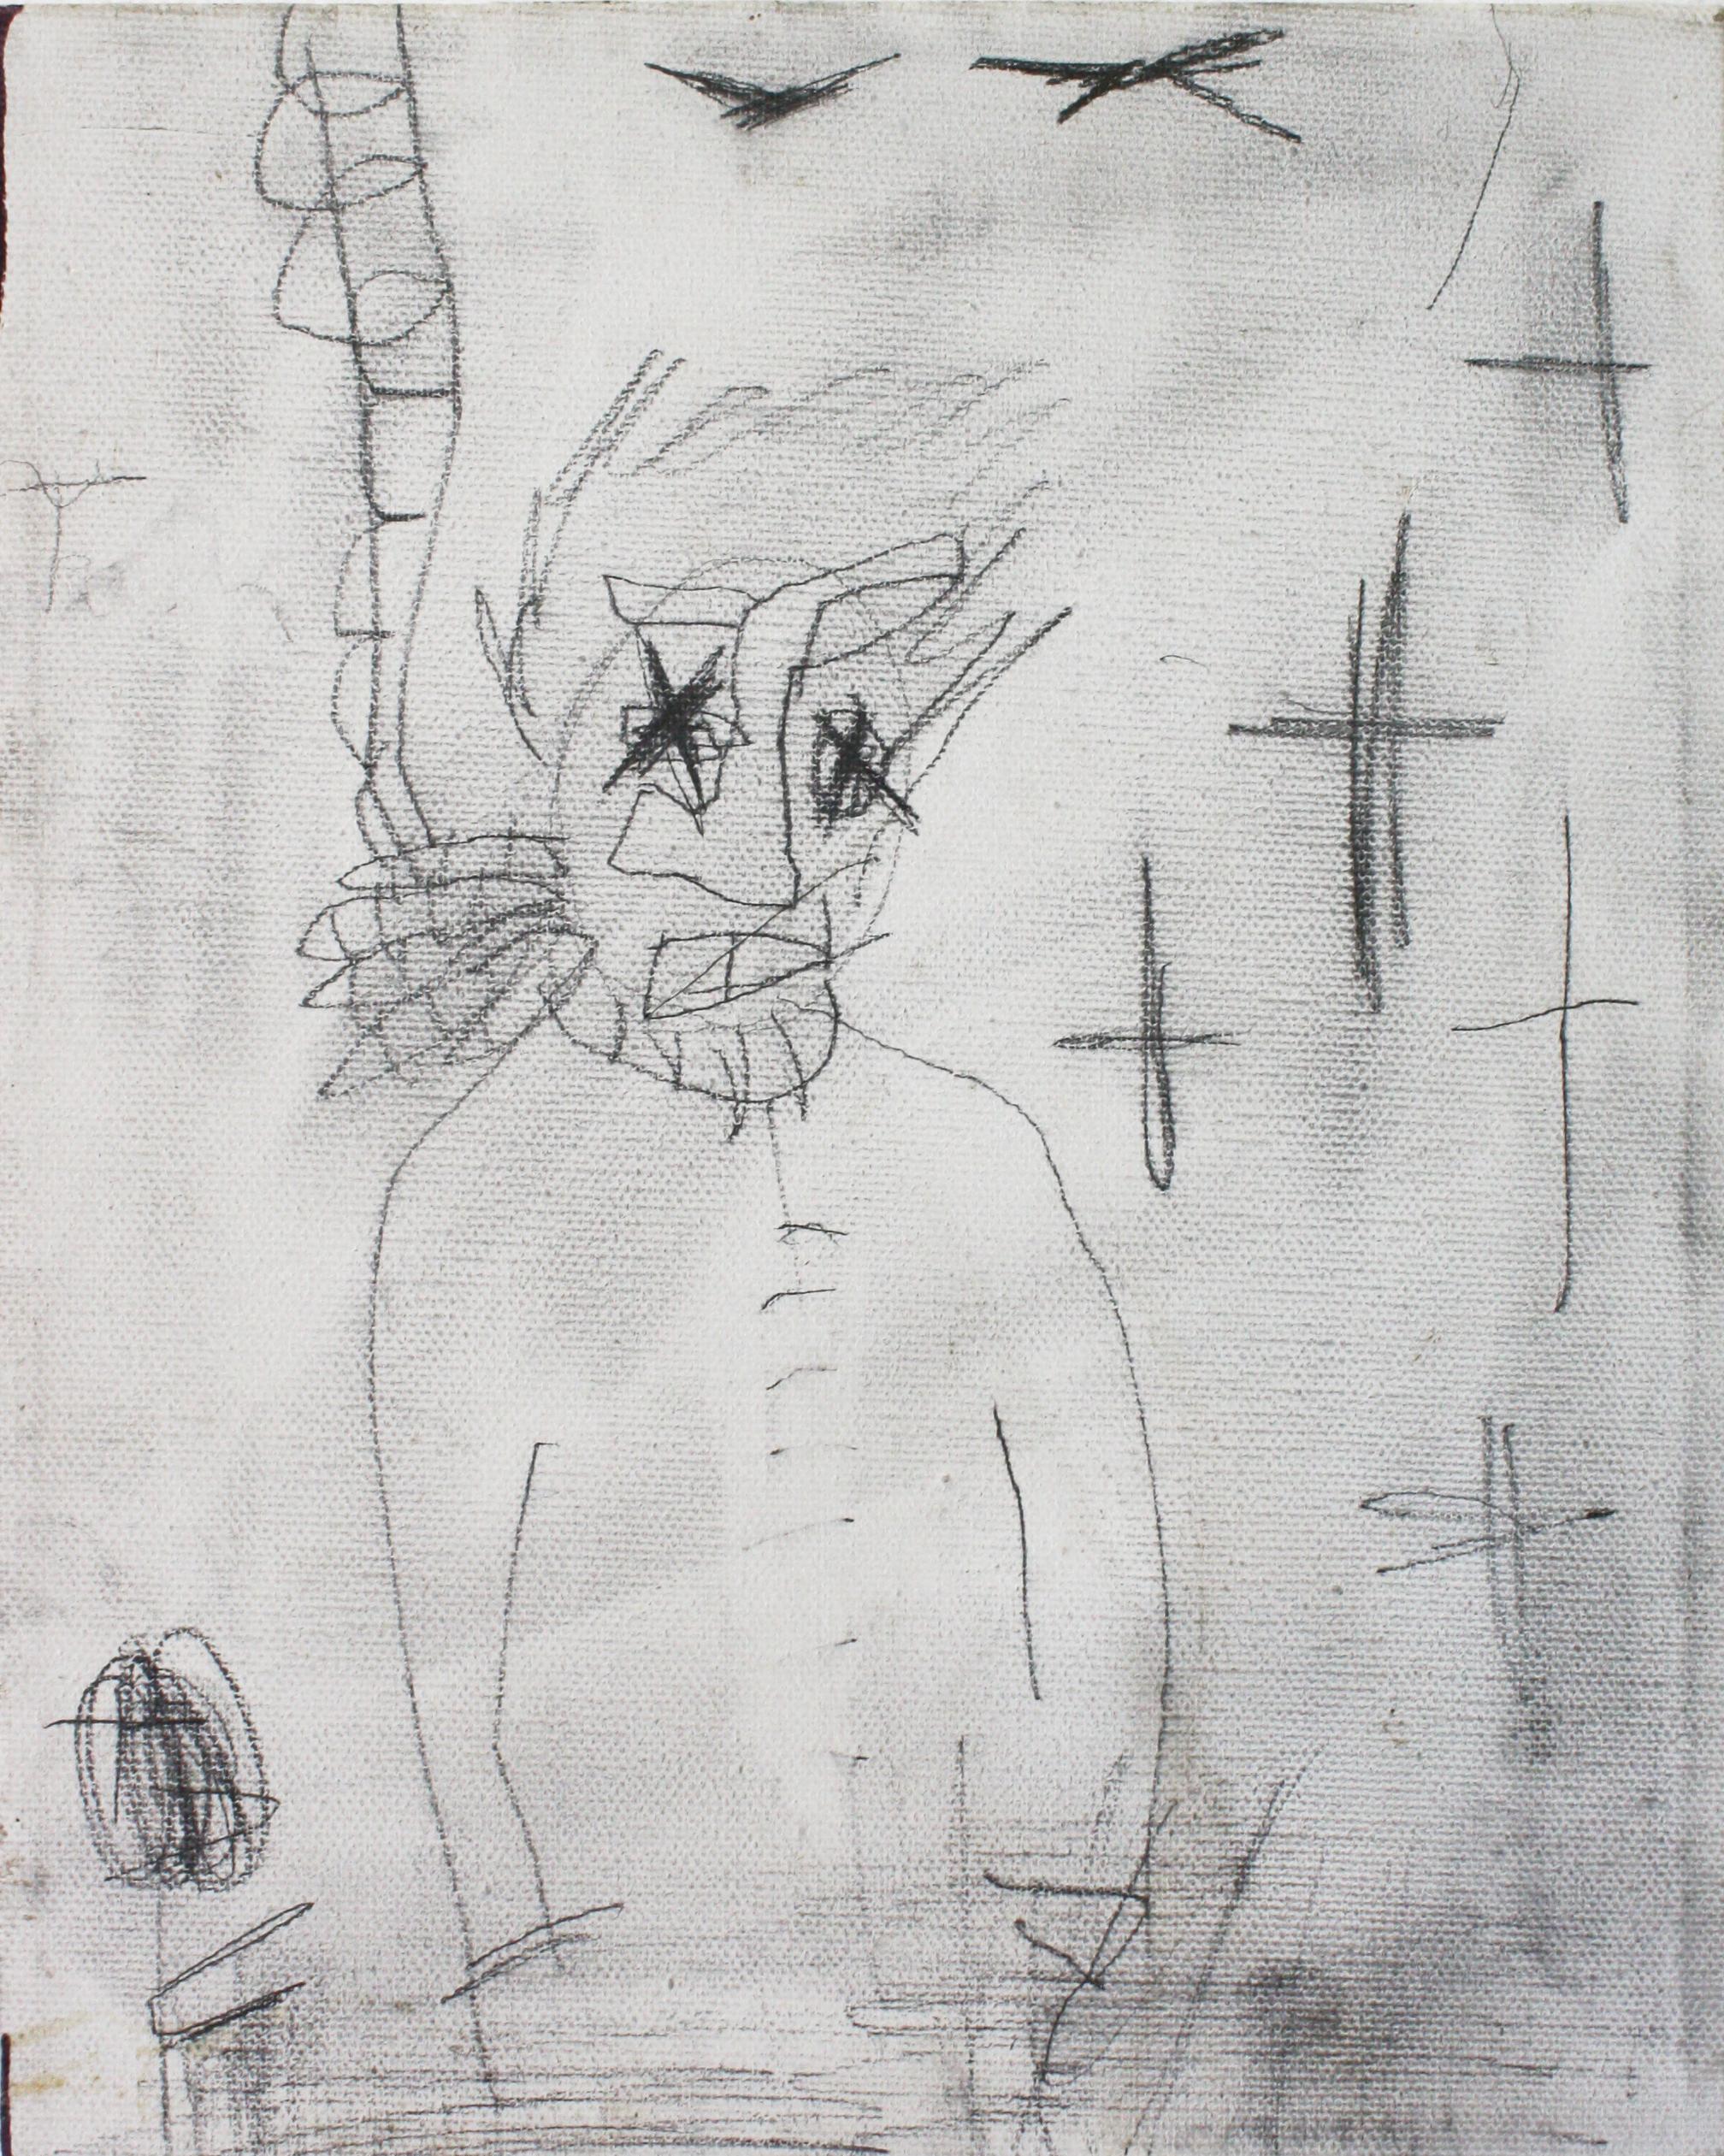 Weren't They Still Tax Payers?- Canvas, Graphite, Ink, Figurative, Commentary - Art by Marlos E’van